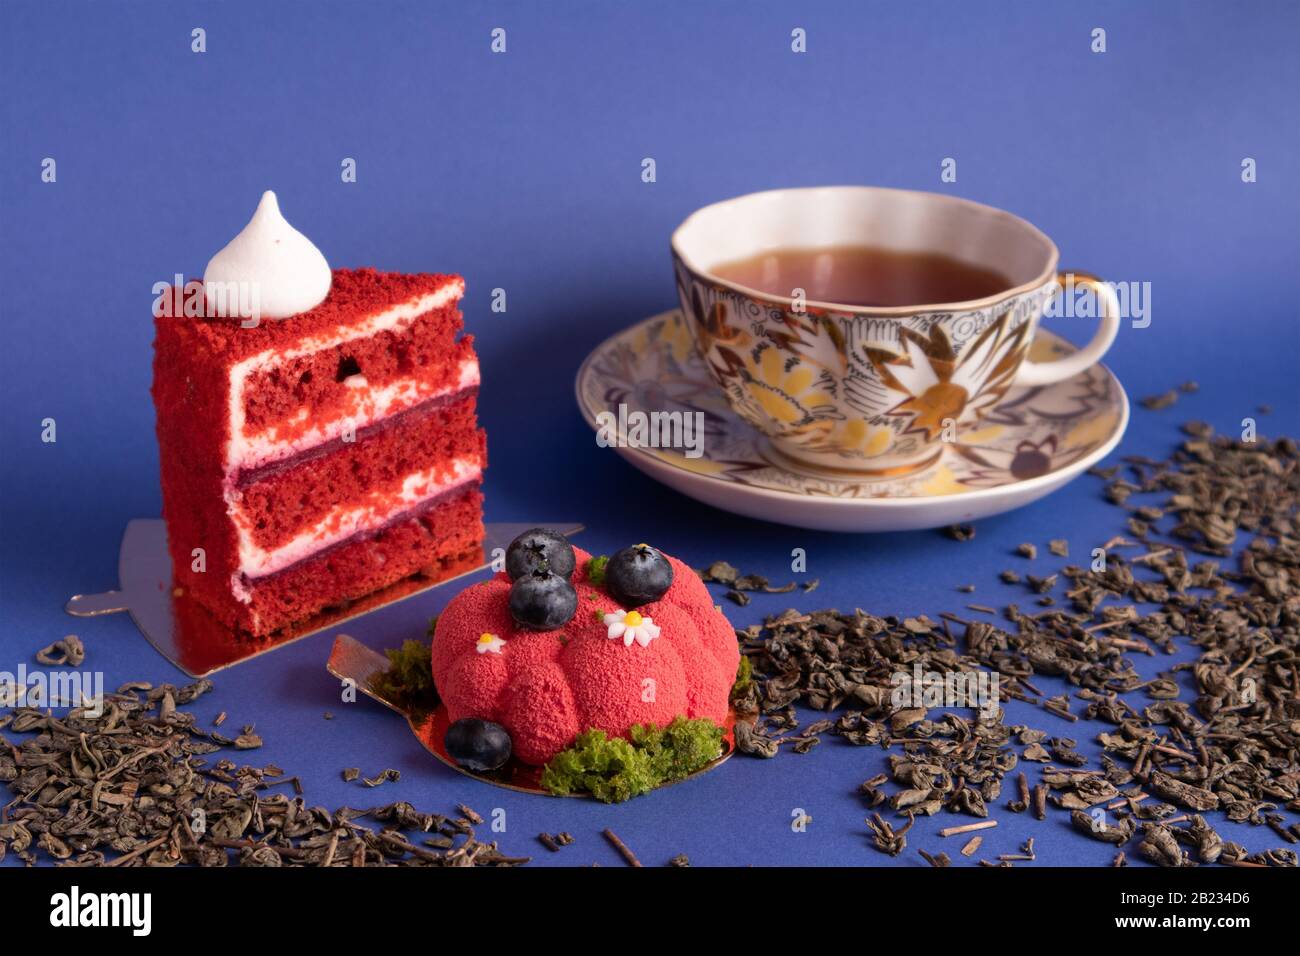 Two appetizing delicious red cakes and a cup of tea on a violet background with scattered dry green tea Stock Photo